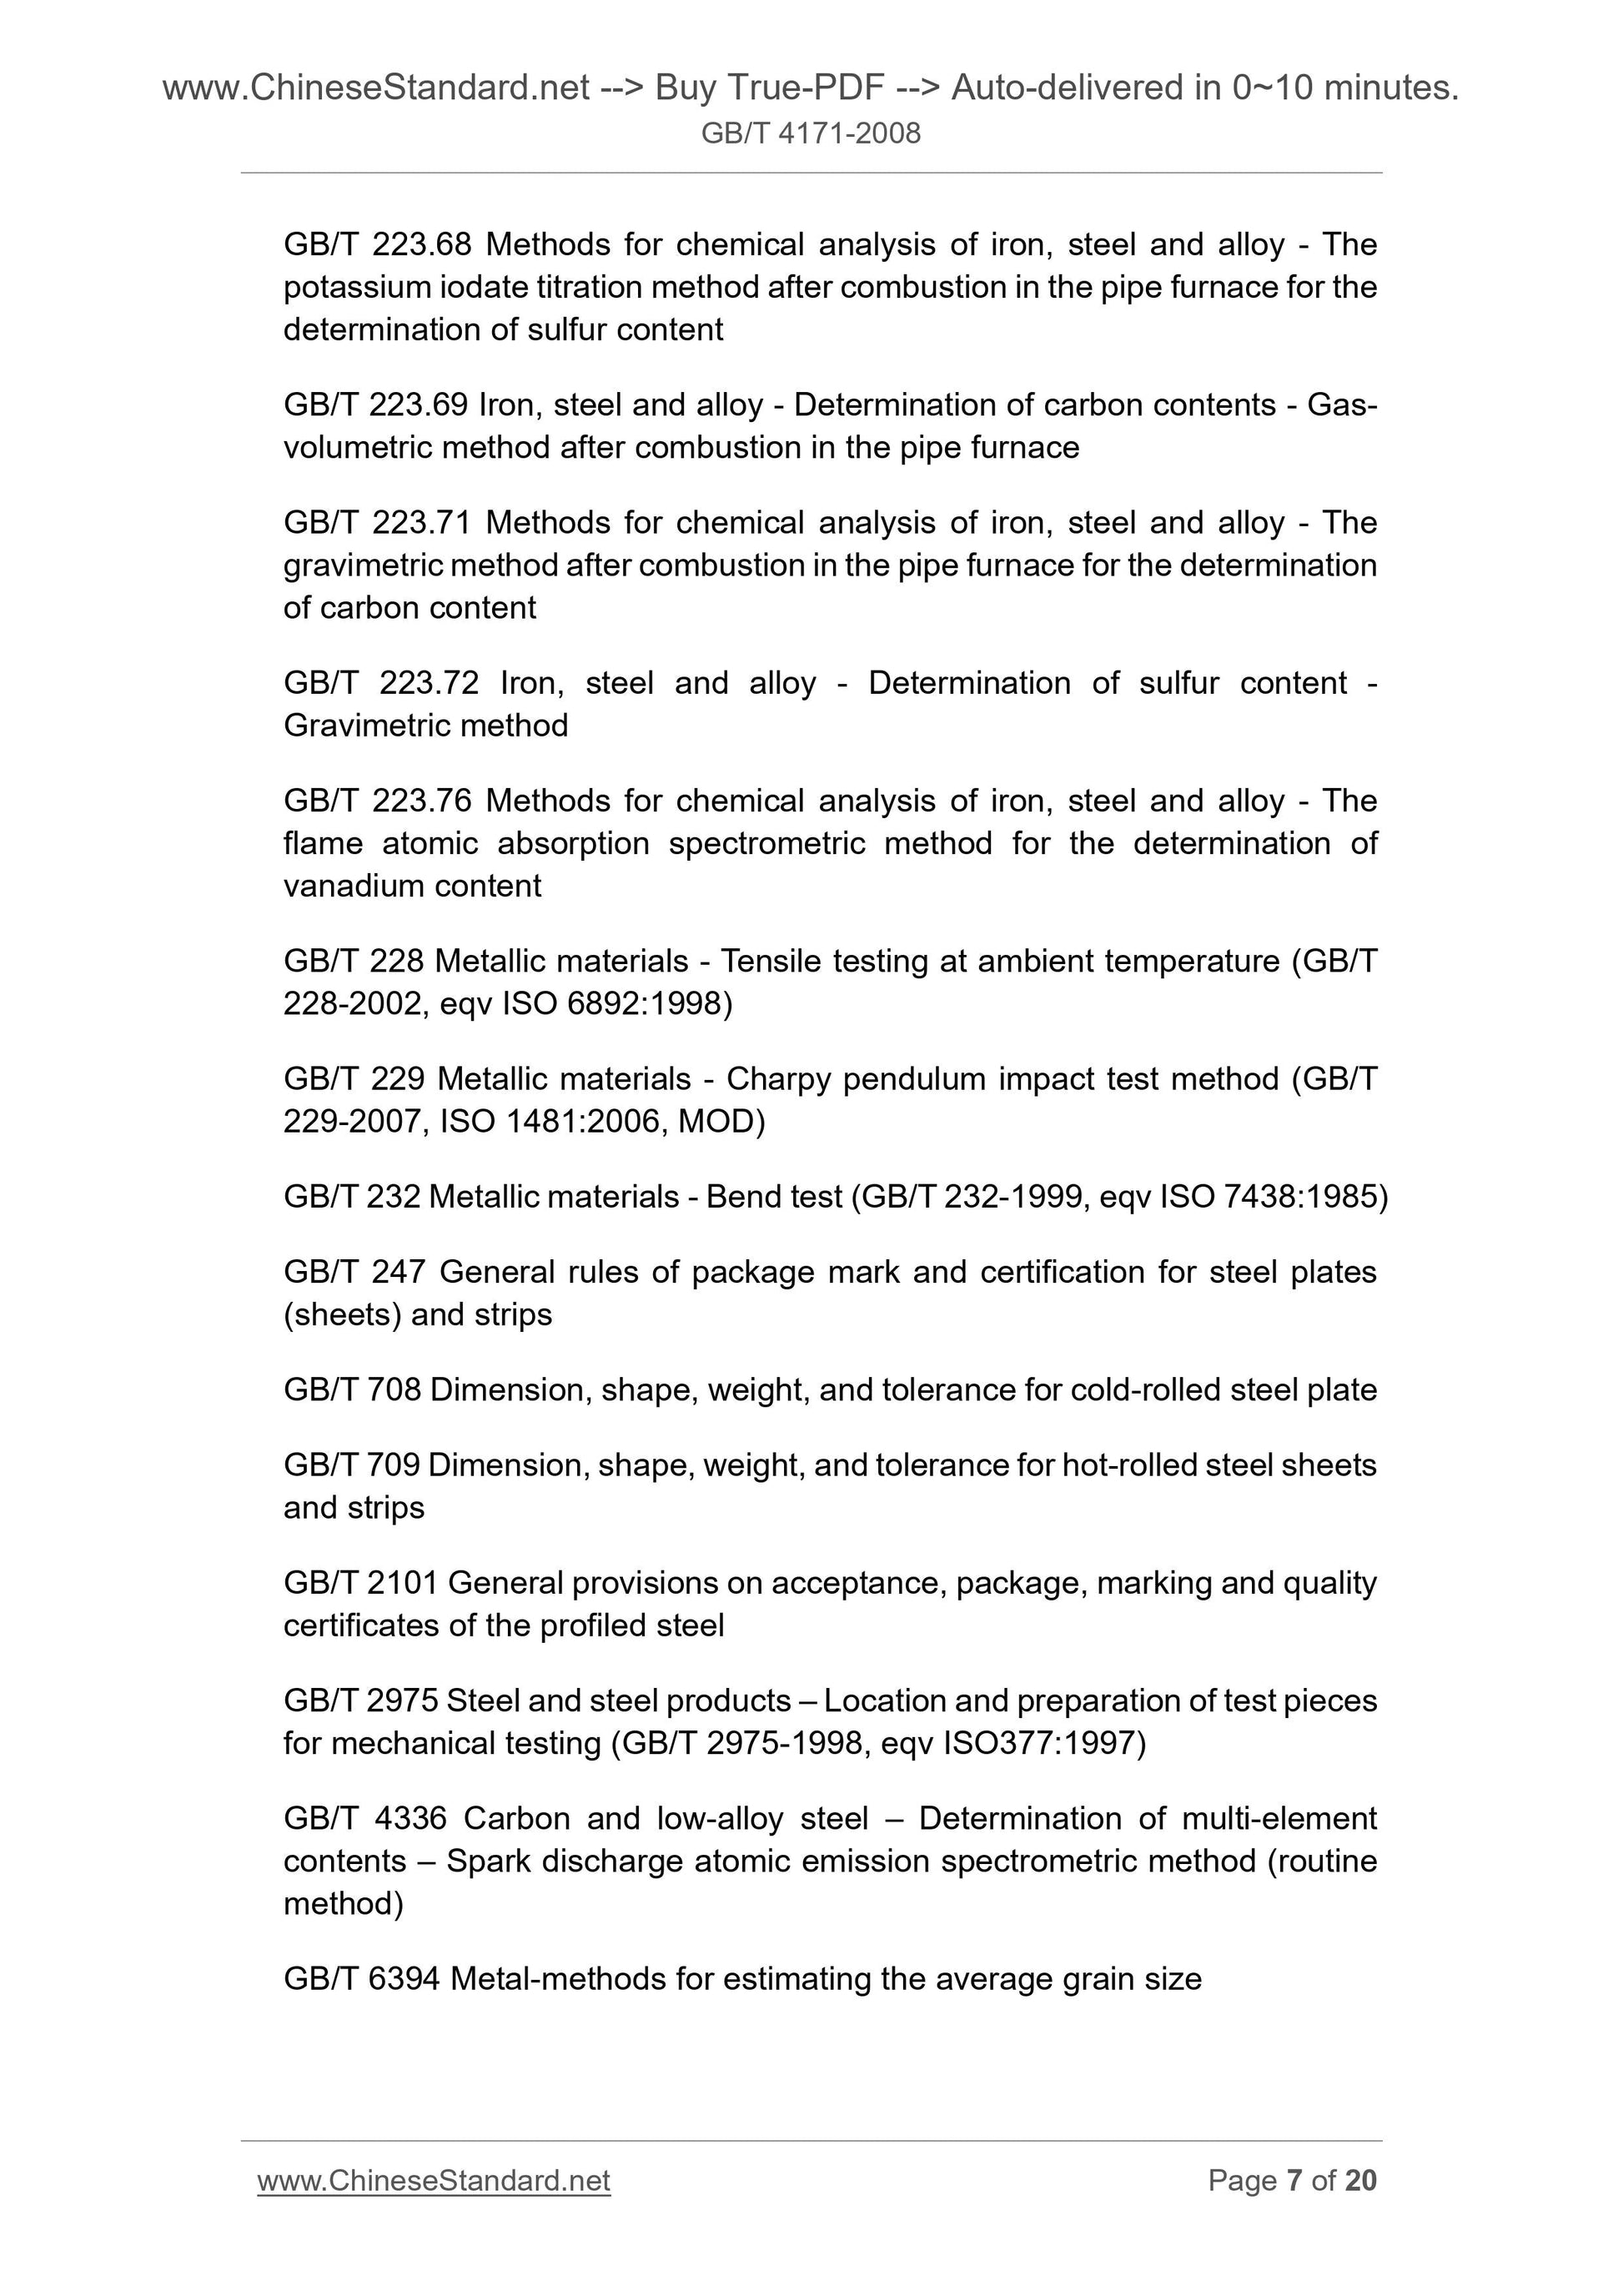 GB/T 4171-2008 Page 6